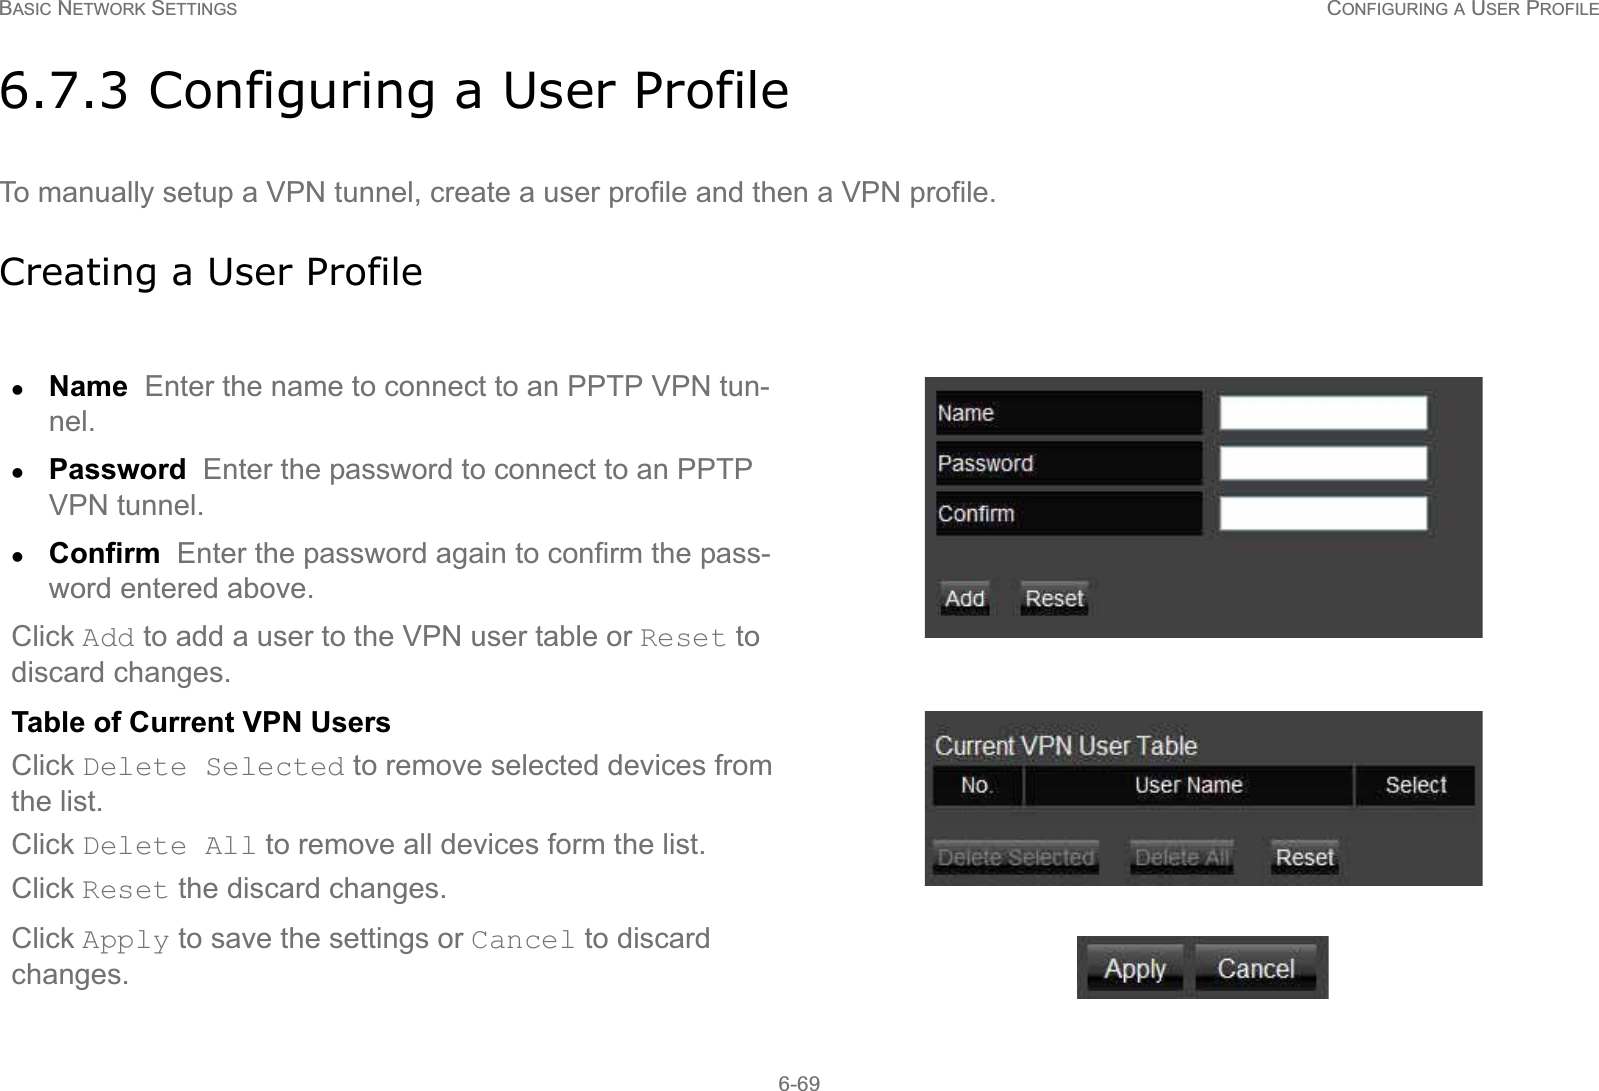 BASIC NETWORK SETTINGS CONFIGURING A USER PROFILE6-696.7.3 Configuring a User ProfileTo manually setup a VPN tunnel, create a user profile and then a VPN profile.Creating a User ProfilezName  Enter the name to connect to an PPTP VPN tun-nel.zPassword  Enter the password to connect to an PPTP VPN tunnel.zConfirm  Enter the password again to confirm the pass-word entered above.Click Add to add a user to the VPN user table or Reset to discard changes.Table of Current VPN UsersClick Delete Selected to remove selected devices from the list.Click Delete All to remove all devices form the list.Click Reset the discard changes.Click Apply to save the settings or Cancel to discard changes.